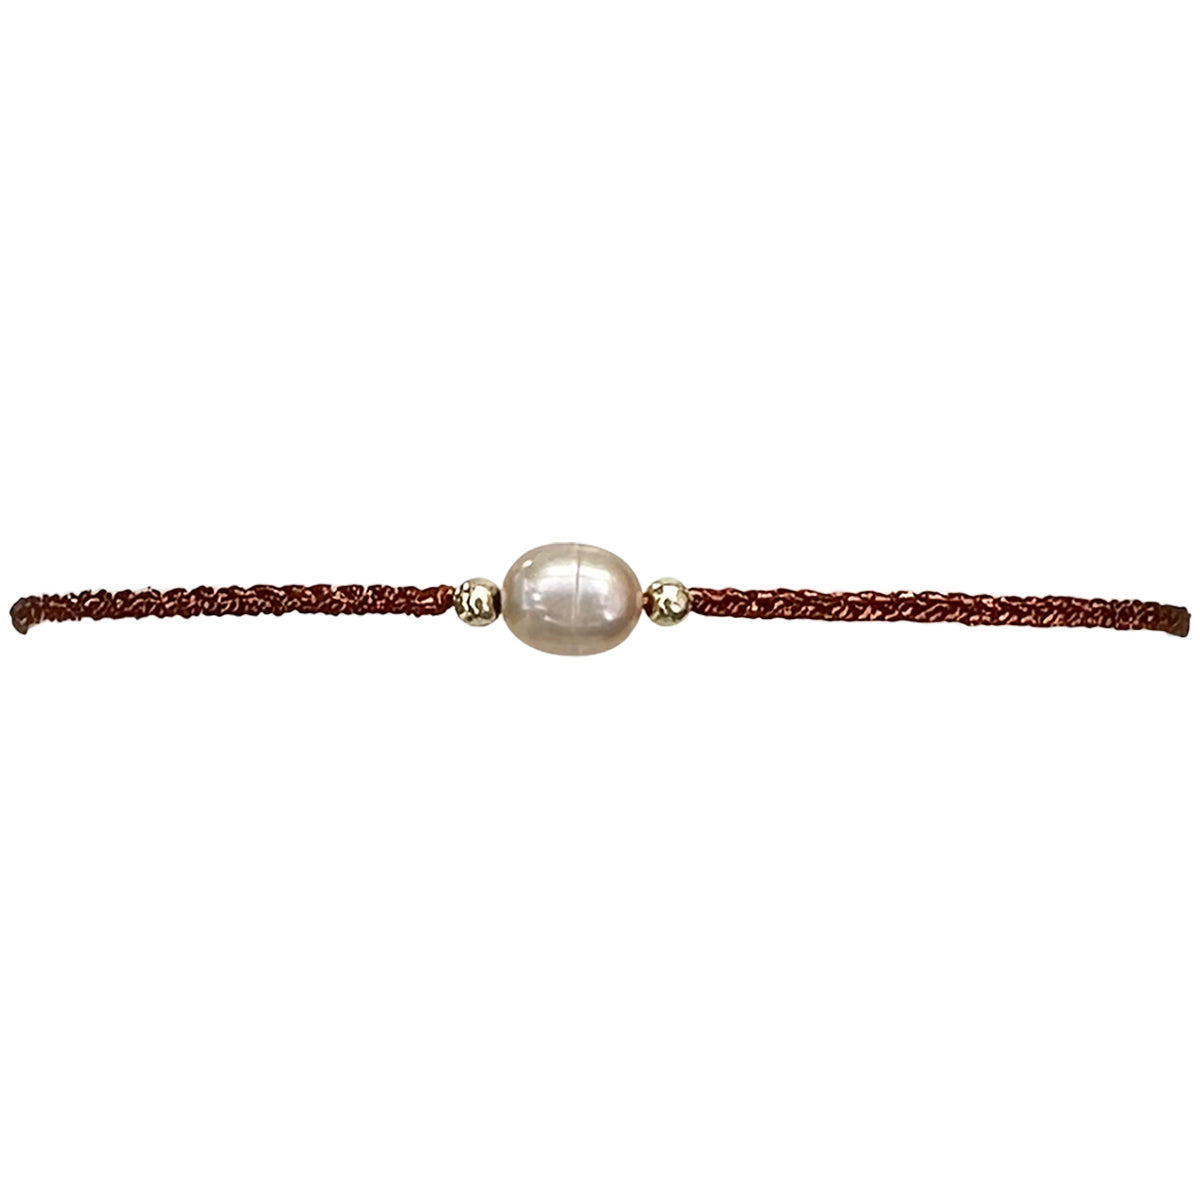 Make a confident statement with this delicate handmade bracelet. This design is handwoven by our team of artisans using metallic threads,14k gold filled beads and a freshwater pearl.  This bracelet is elegant and femenine, making it the perfect accessory for any occasion.  Details  - Metallic thread  - Freshwater pearl  - 14 k gold filled beads  - Adjustable Bracelet  -Width: 2mm  -Can be worn in the  wate